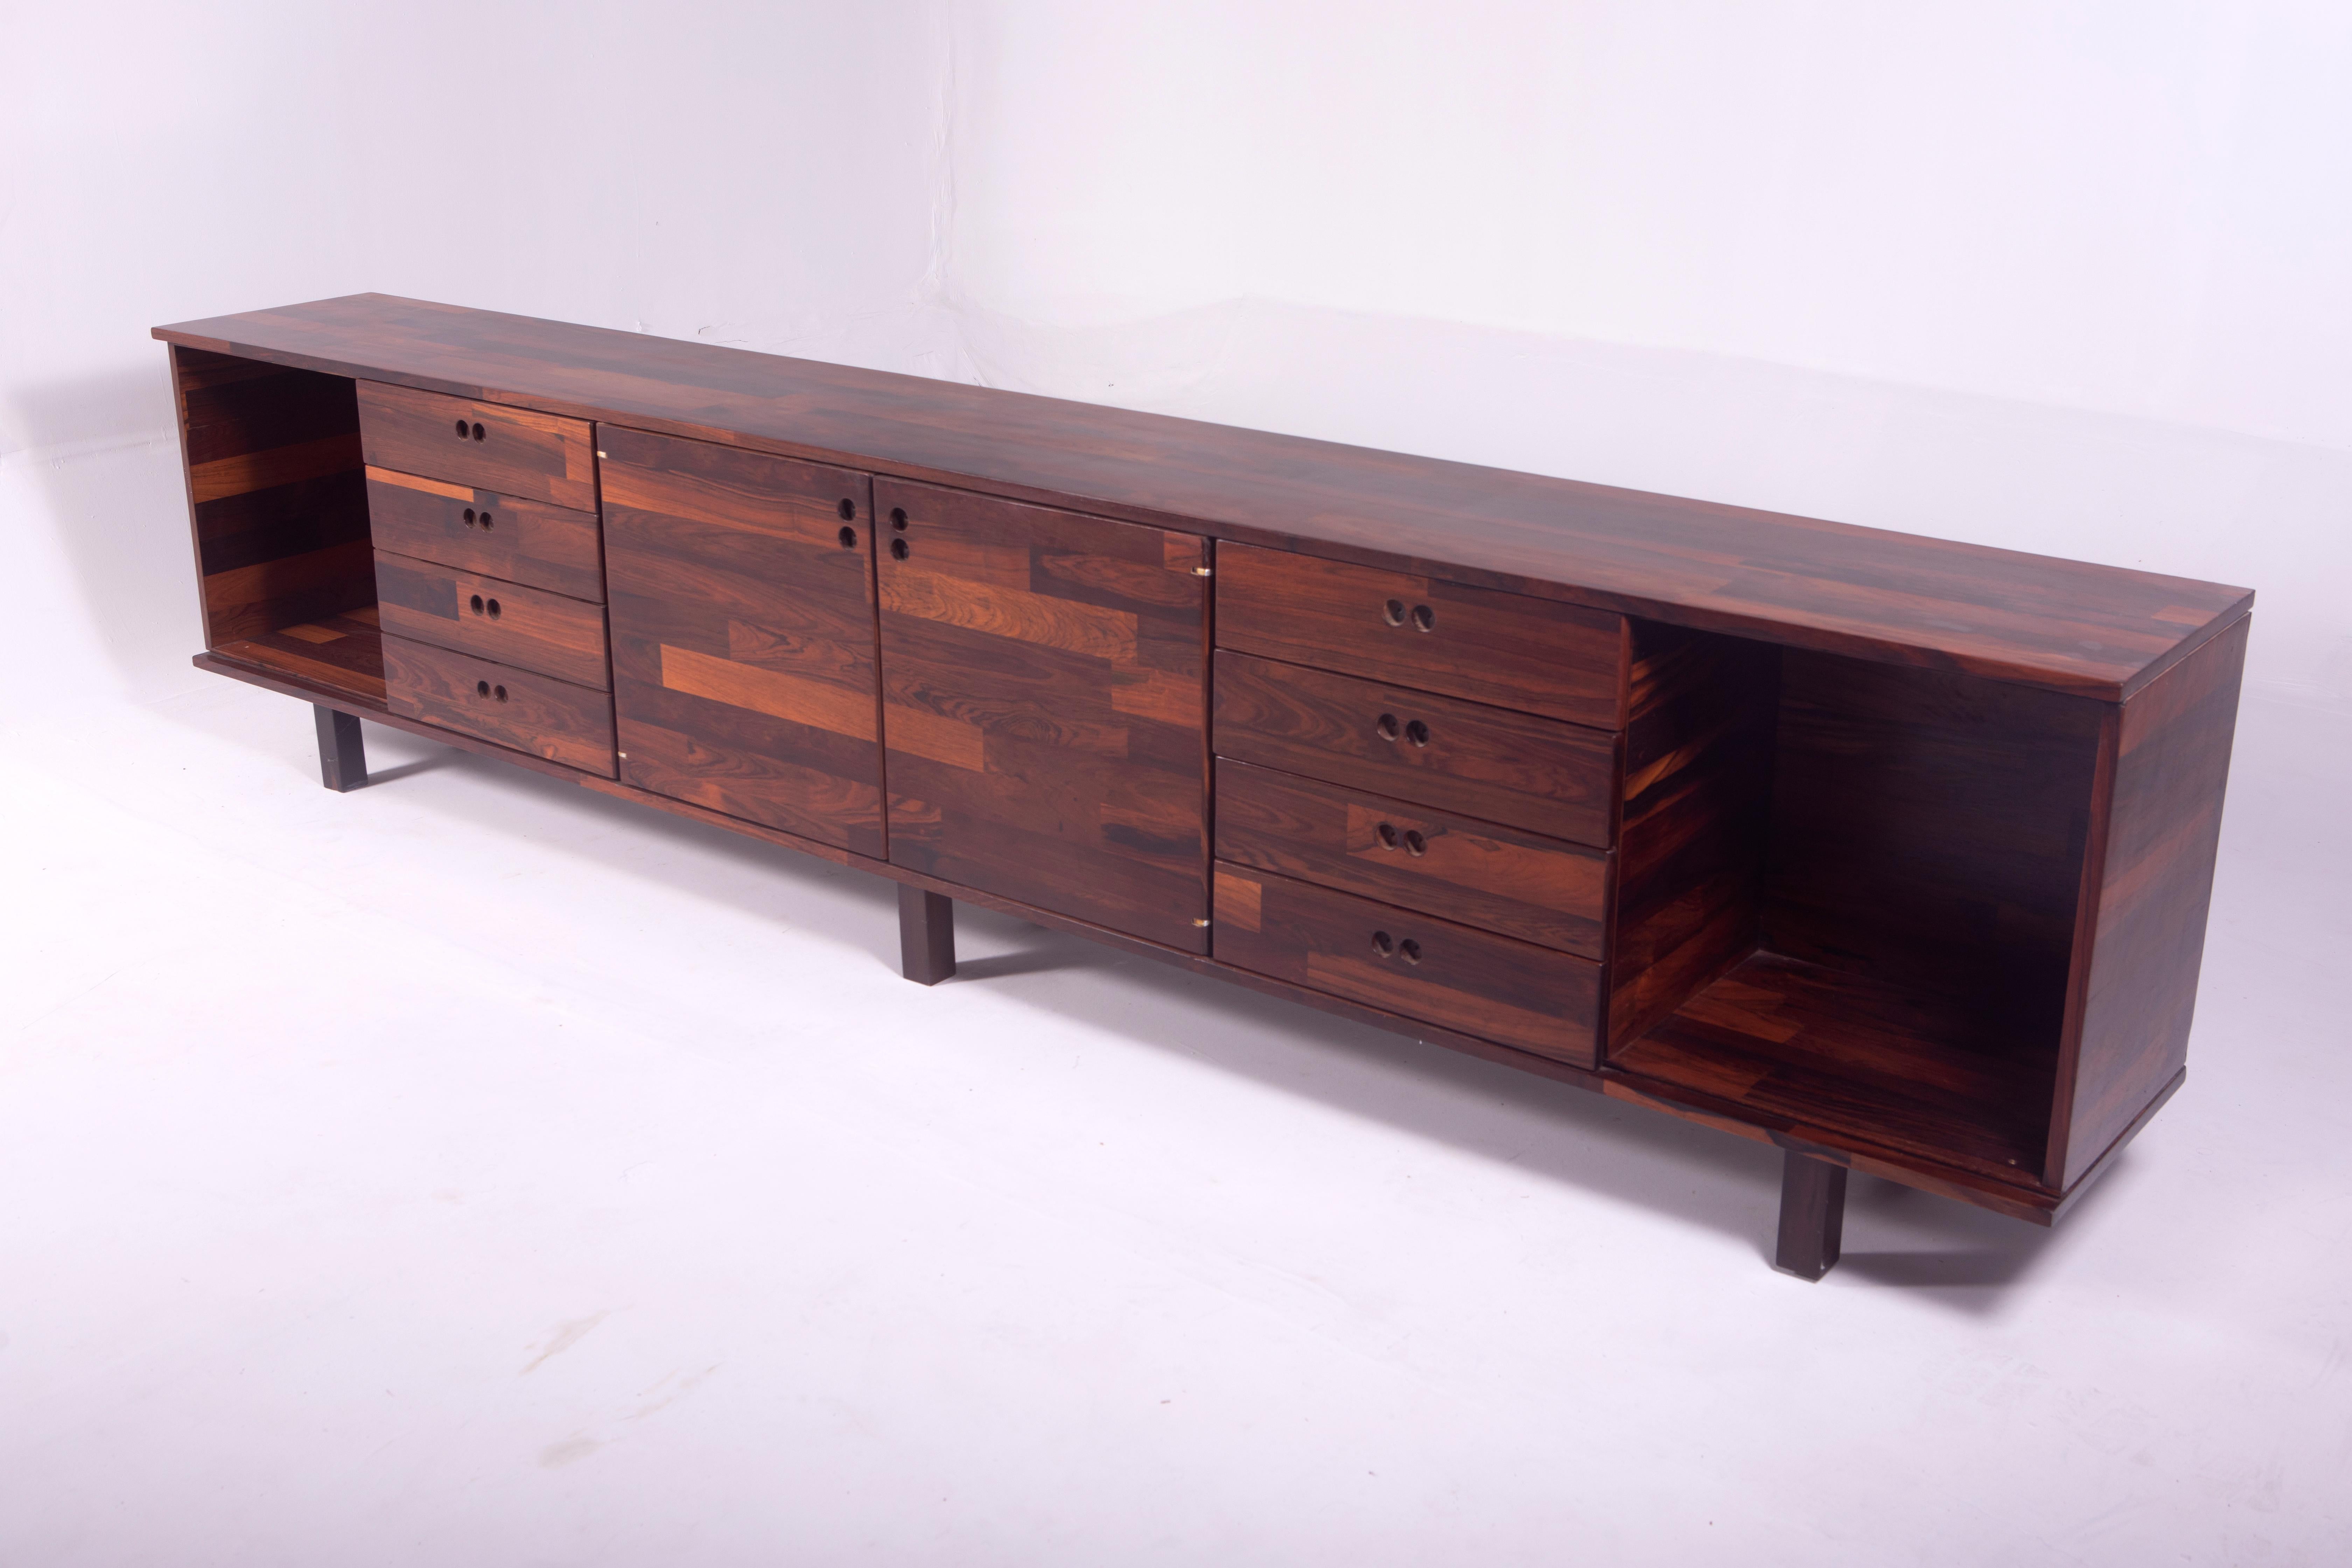 Mid-Century Modern Buffet by Jorge Zalszupin, Brazil, 1960s

Fashioned by the talented Polish-Brazilian architect and designer, Jorge Zalszupin, this solid wood buffet is a harmonious fusion of artistry and functionality. Boasting six storage